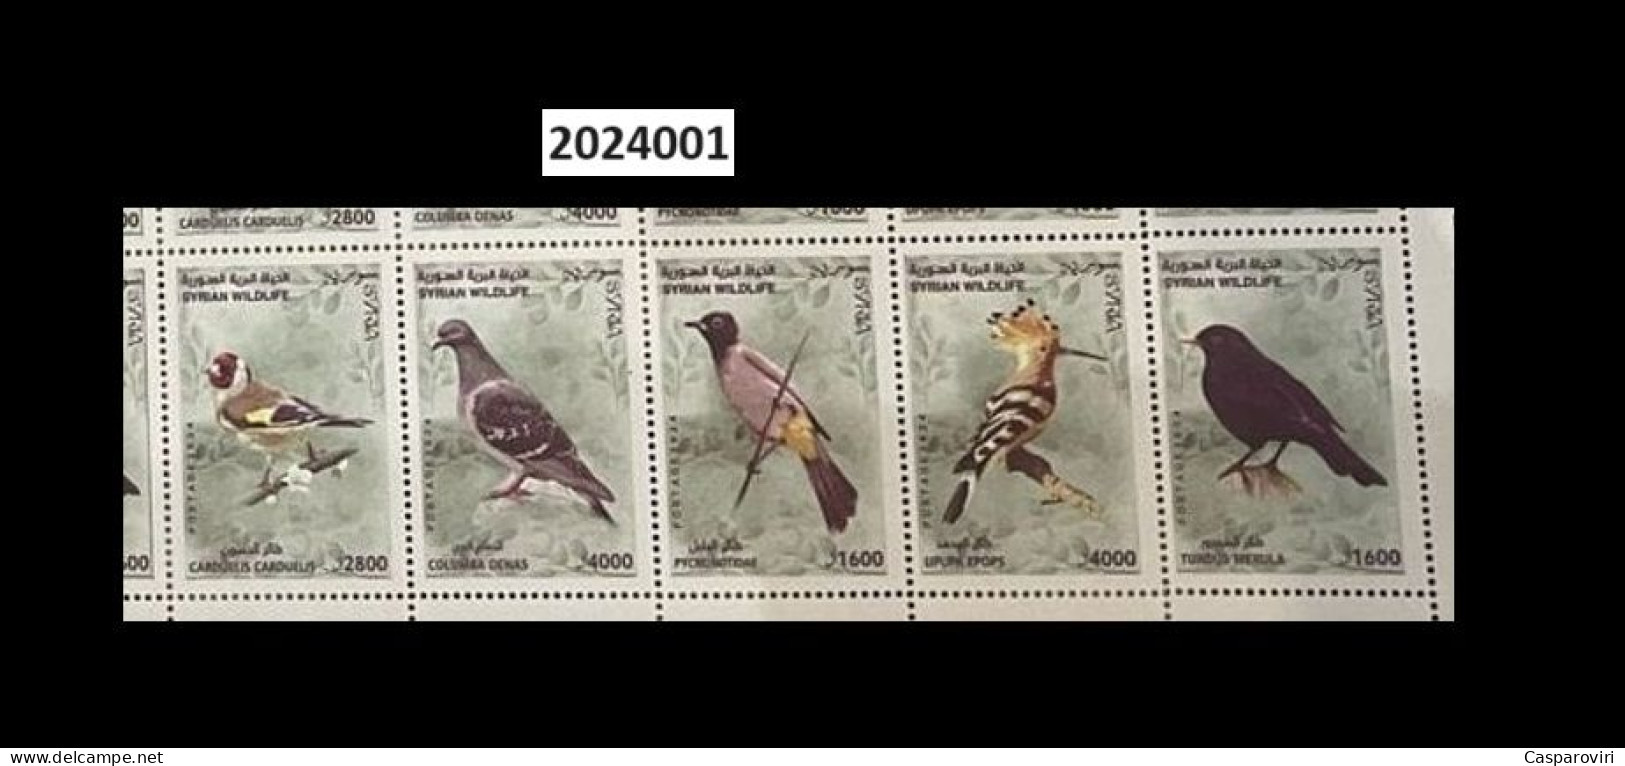 2024401; Syria; 2024; Strip Of 5 Stamps On Envelope; Syrian Wildlife; Syrian Birds; 5 Different Stamps; Canceled - Siria